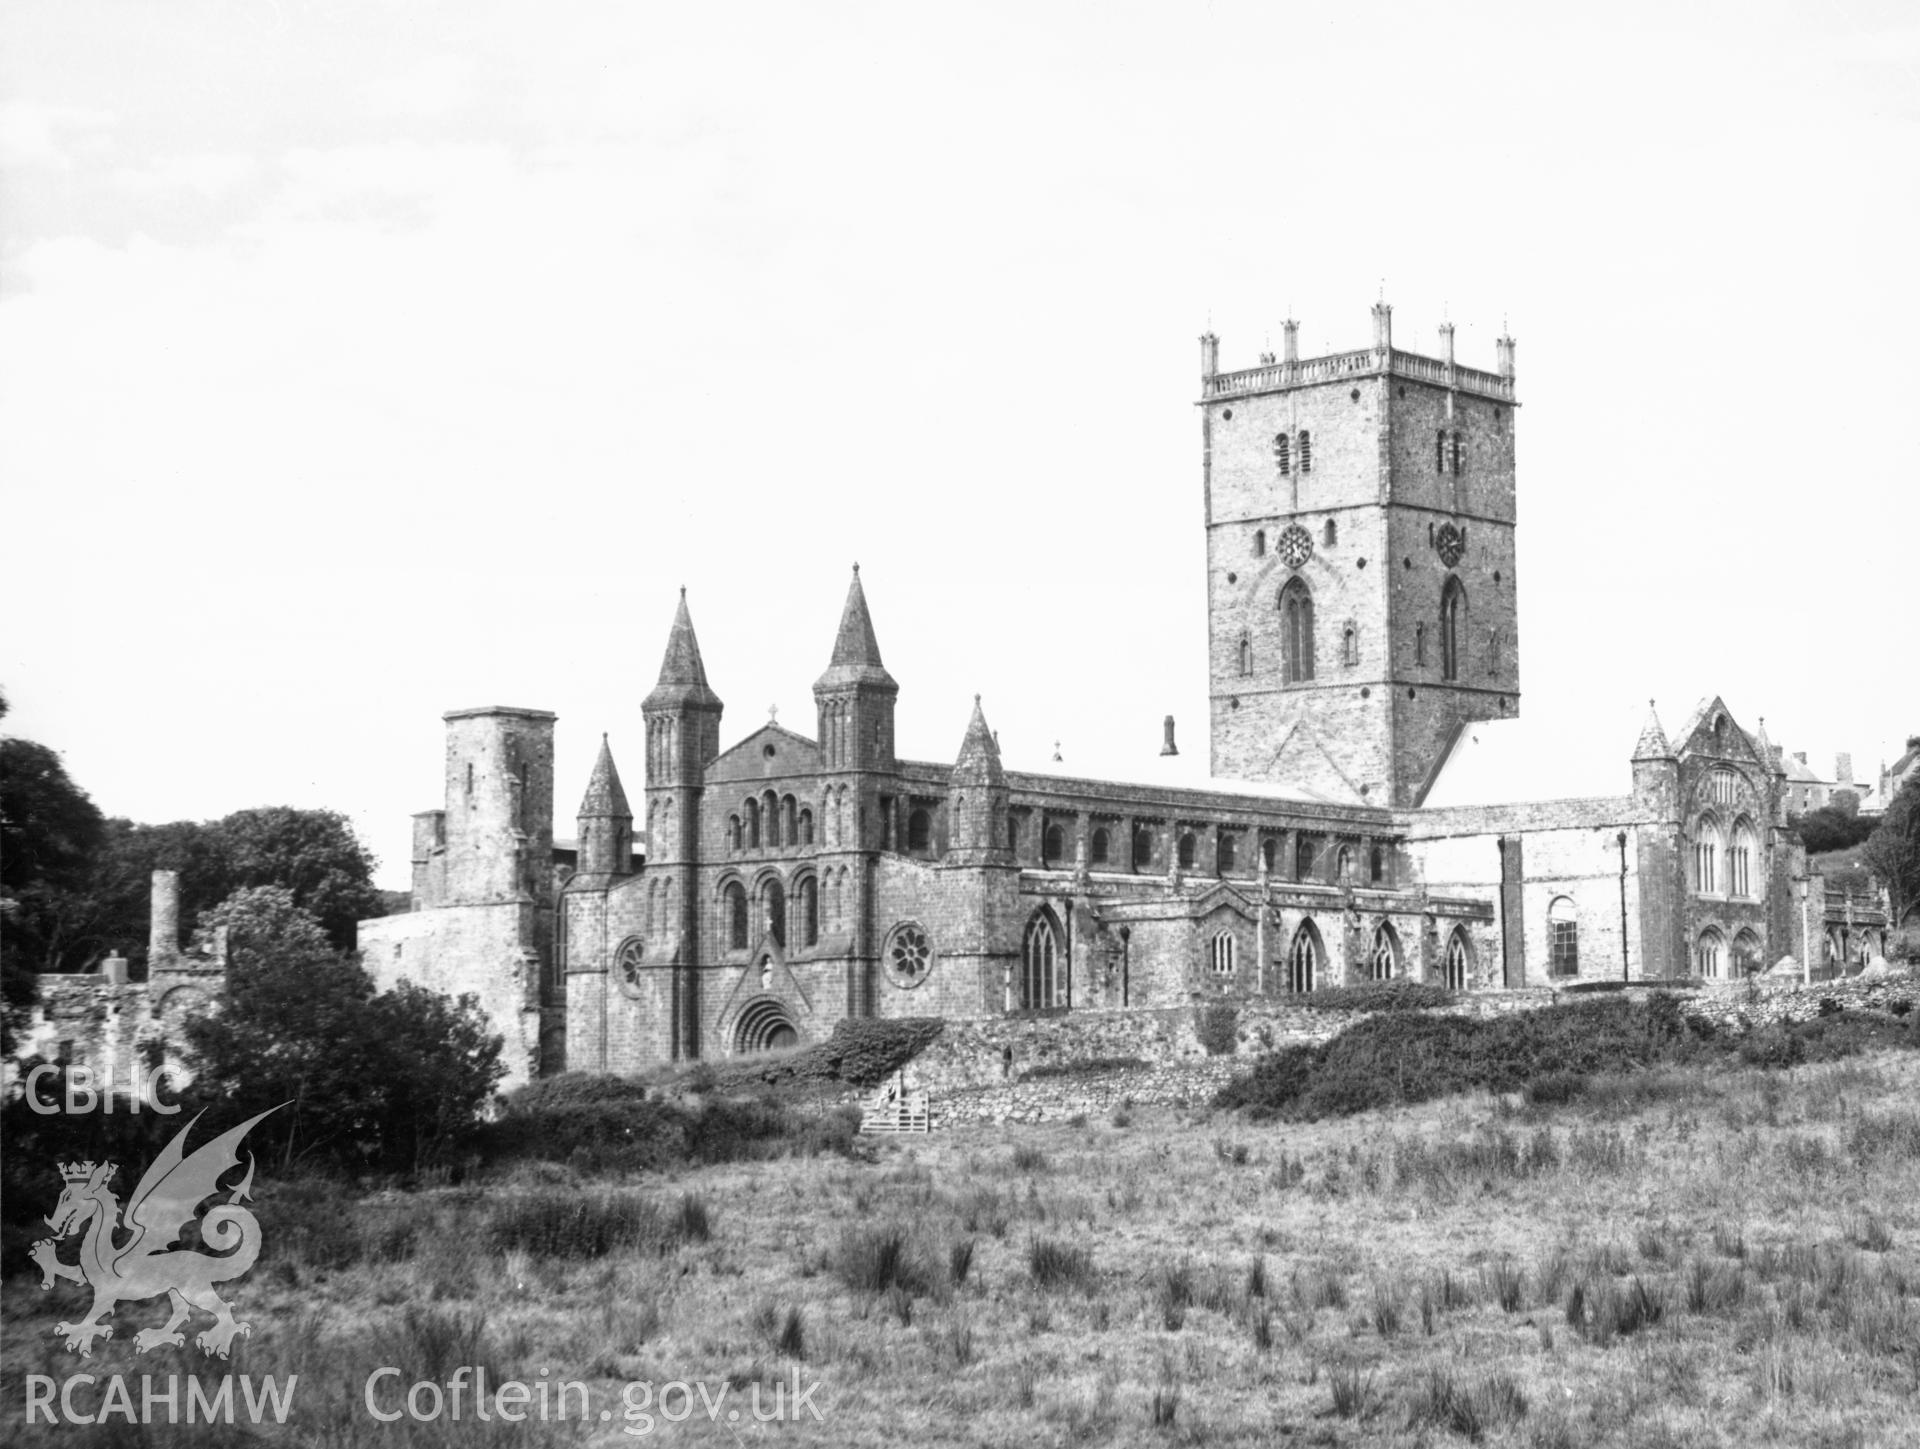 1 b/w print showing view of St David's Cathedral, Pembrokeshire; collated by the former Central Office of Information.